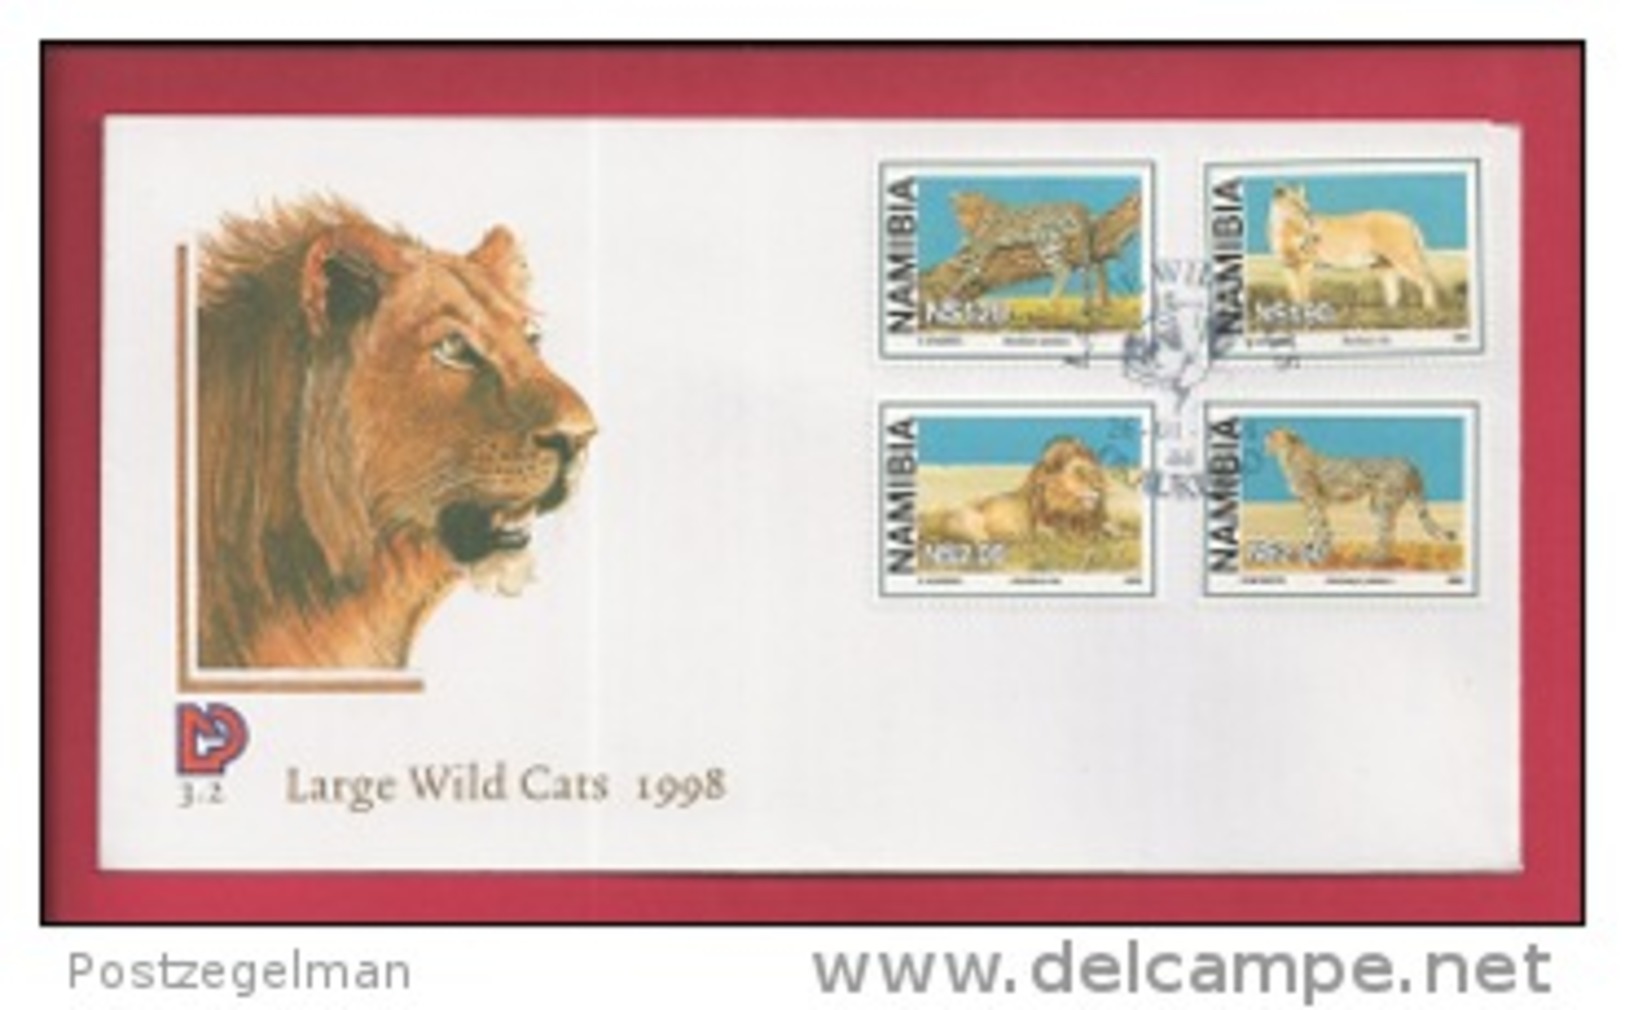 NAMIBIA, 1998, Mint FDC 3.2, Large Wild Cats, Stampnr(s). SACC 234-237, F3608 - Namibië (1990- ...)